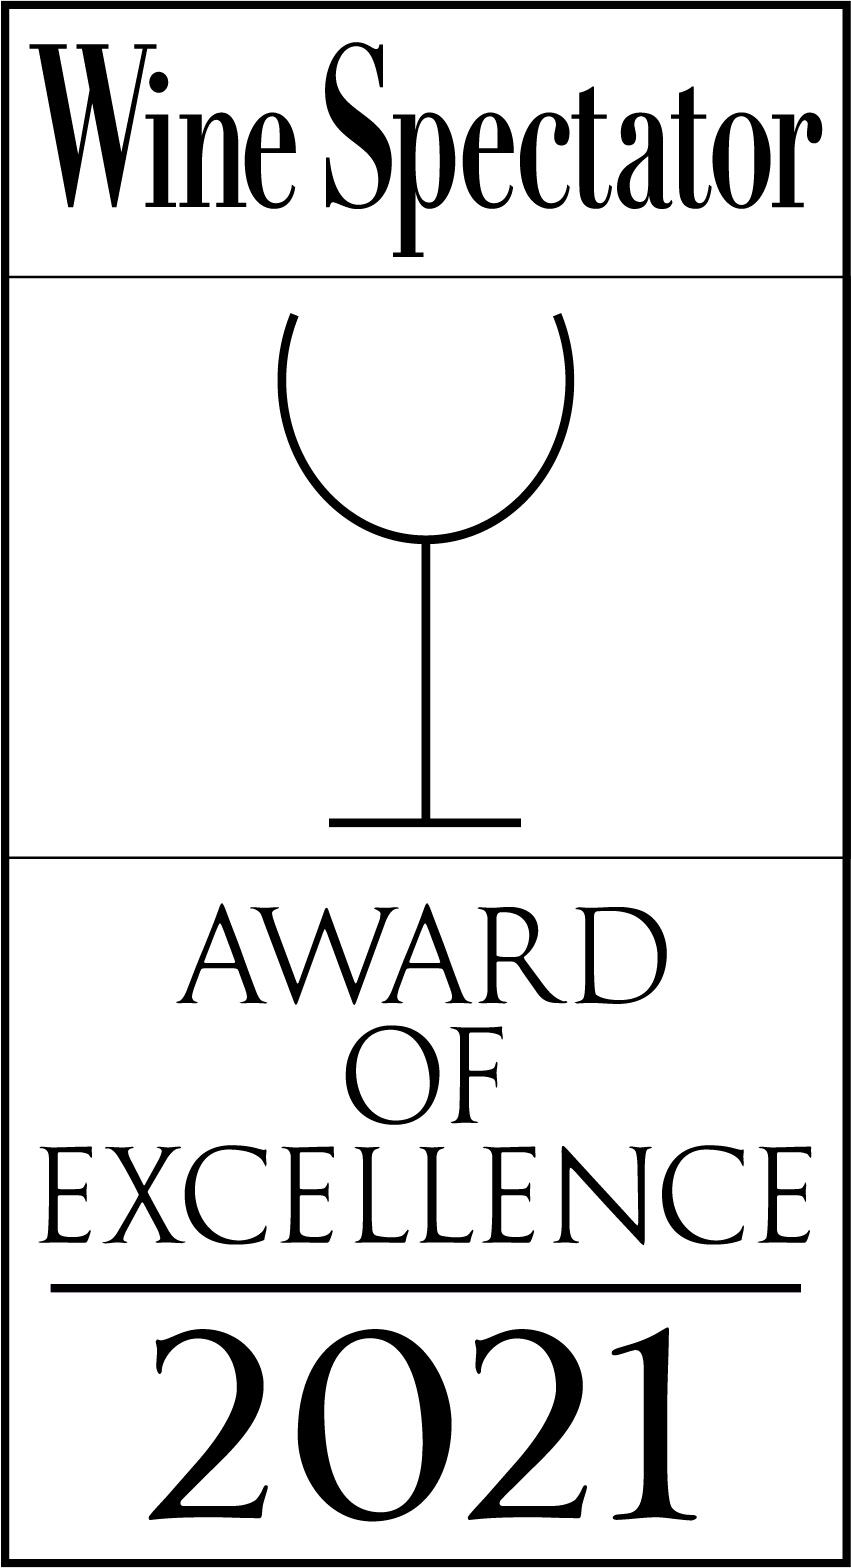 Wine spectator - award of excellence 2021